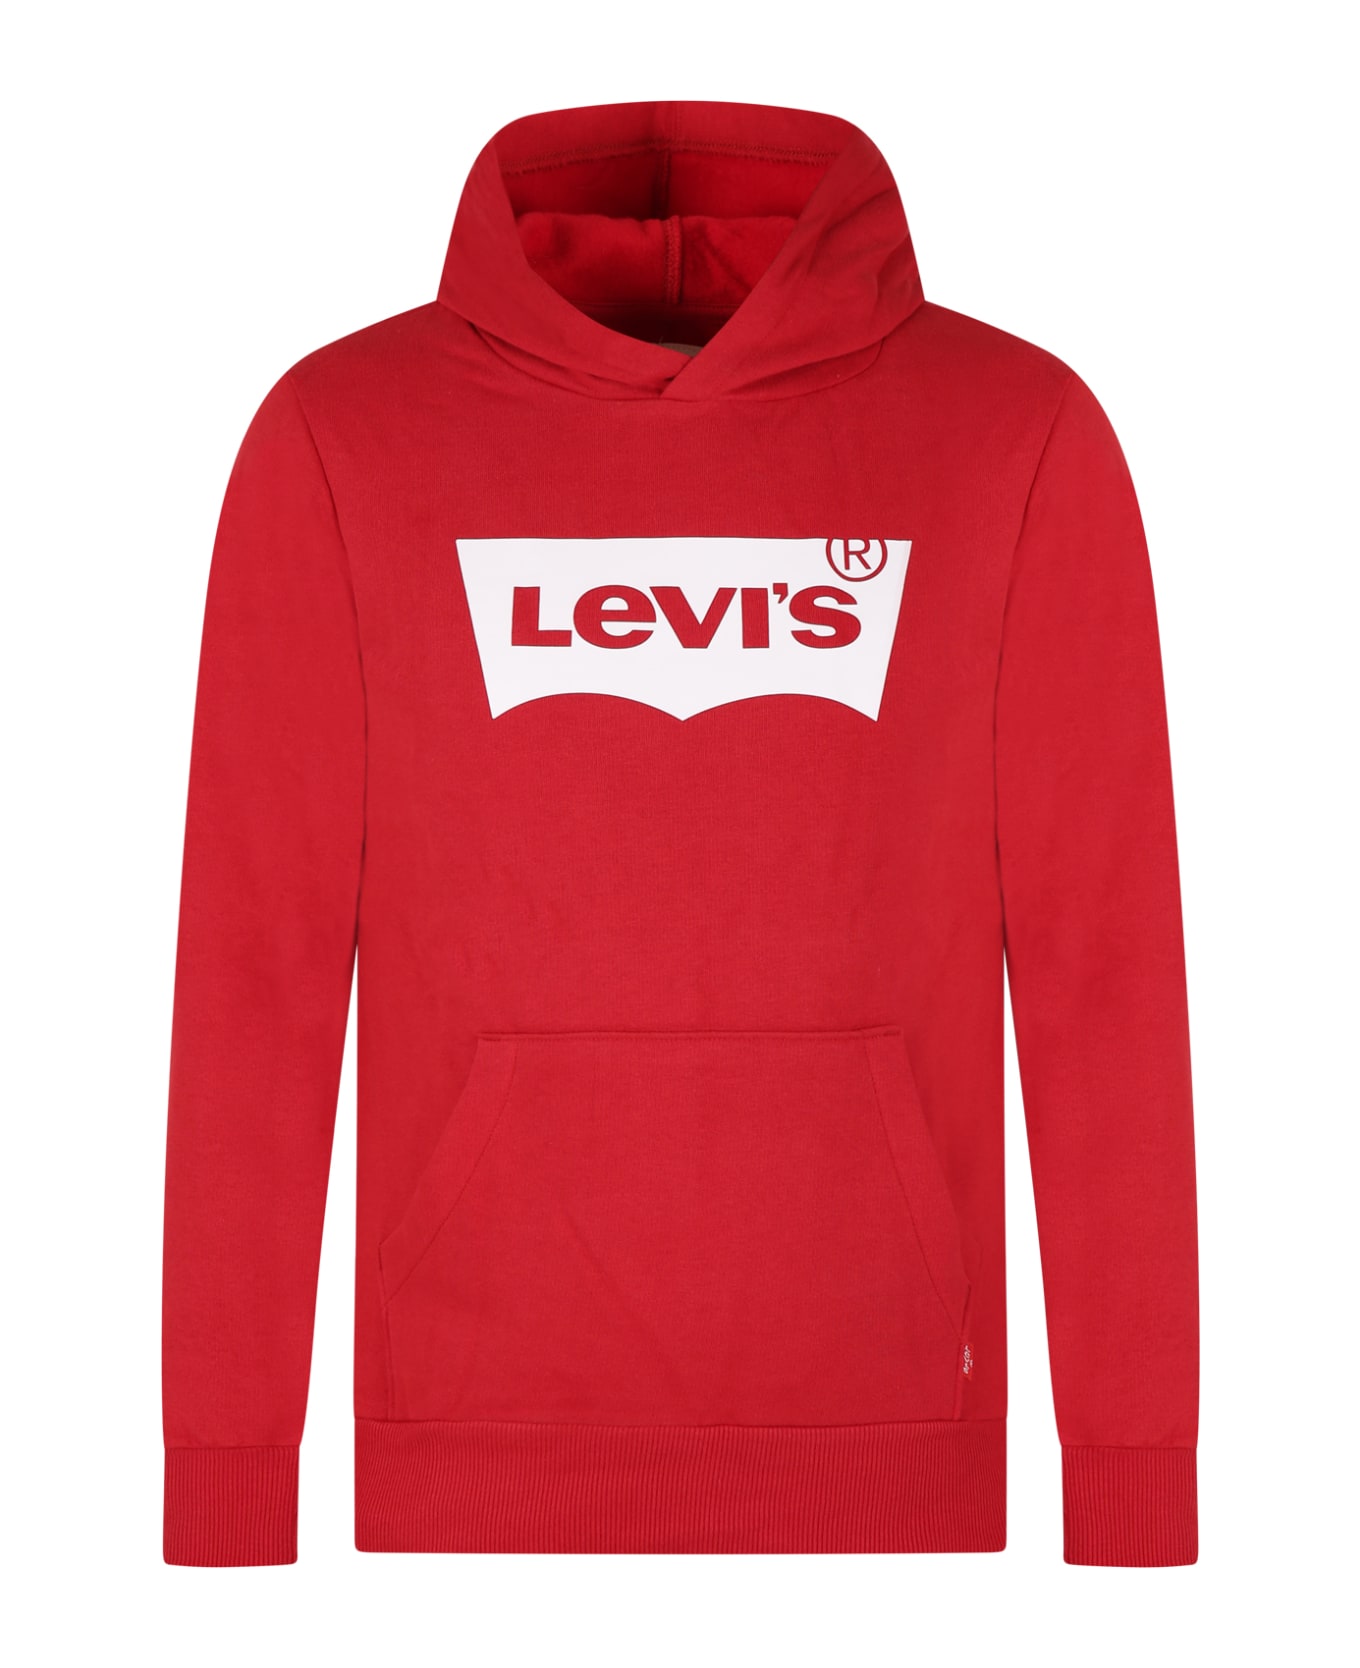 Levi's Red Sweatshirt For Kids With Logo - Red